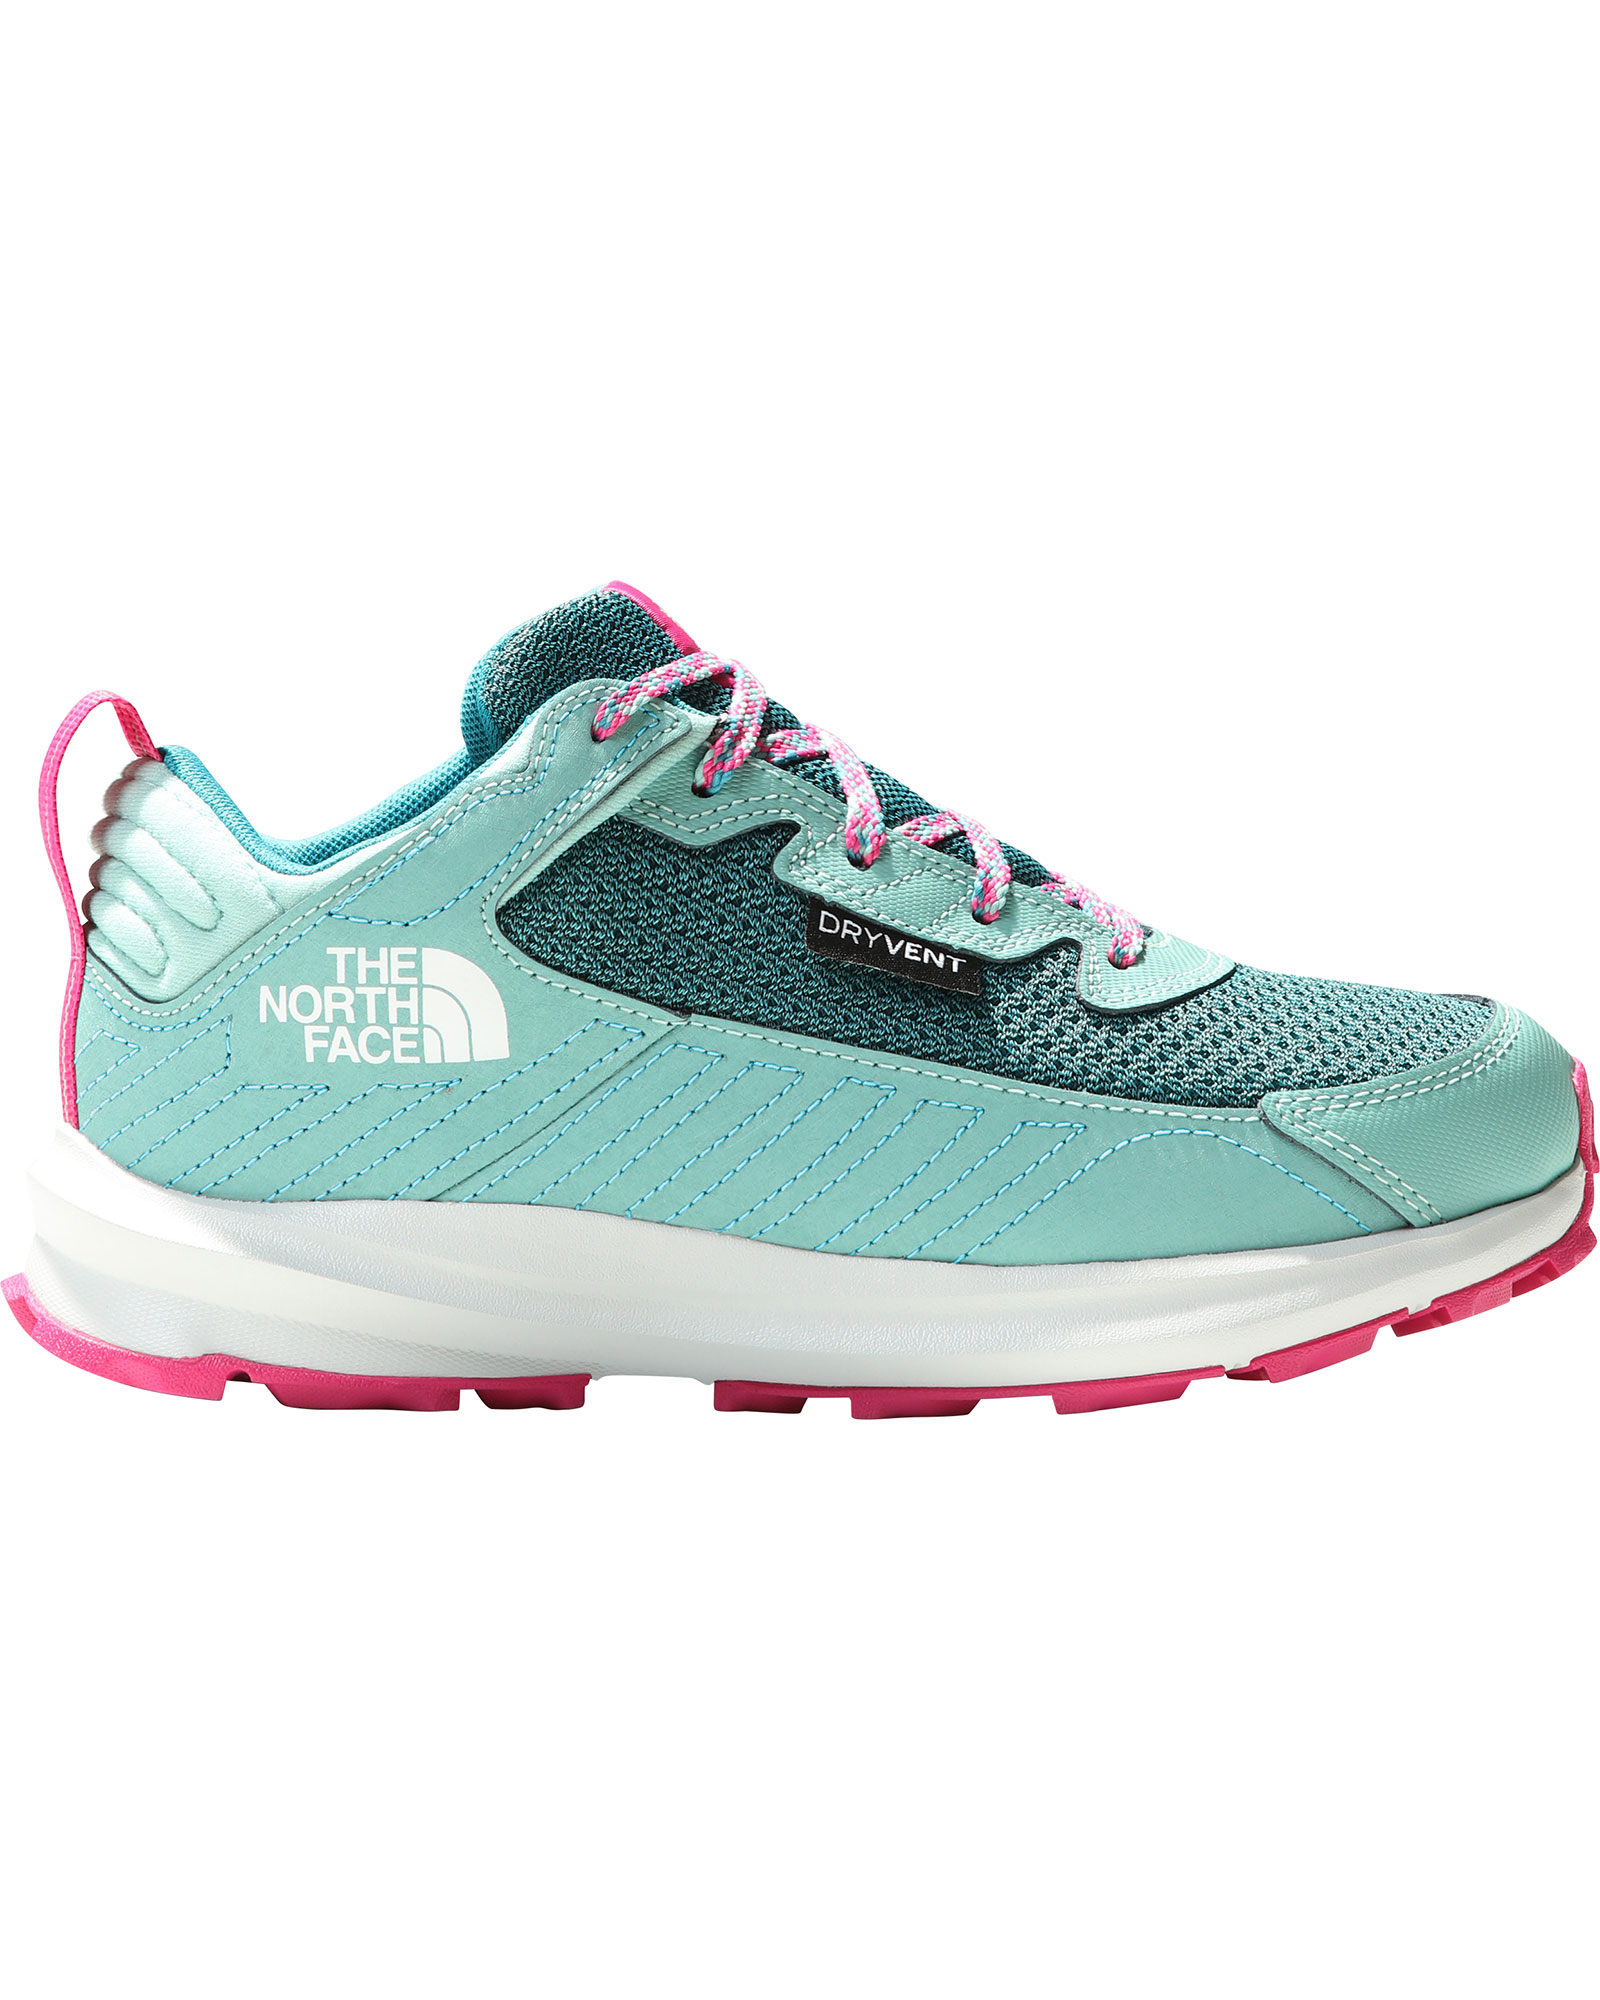 The North Face Youth Fastpack Hiker Kids Waterproof Shoes